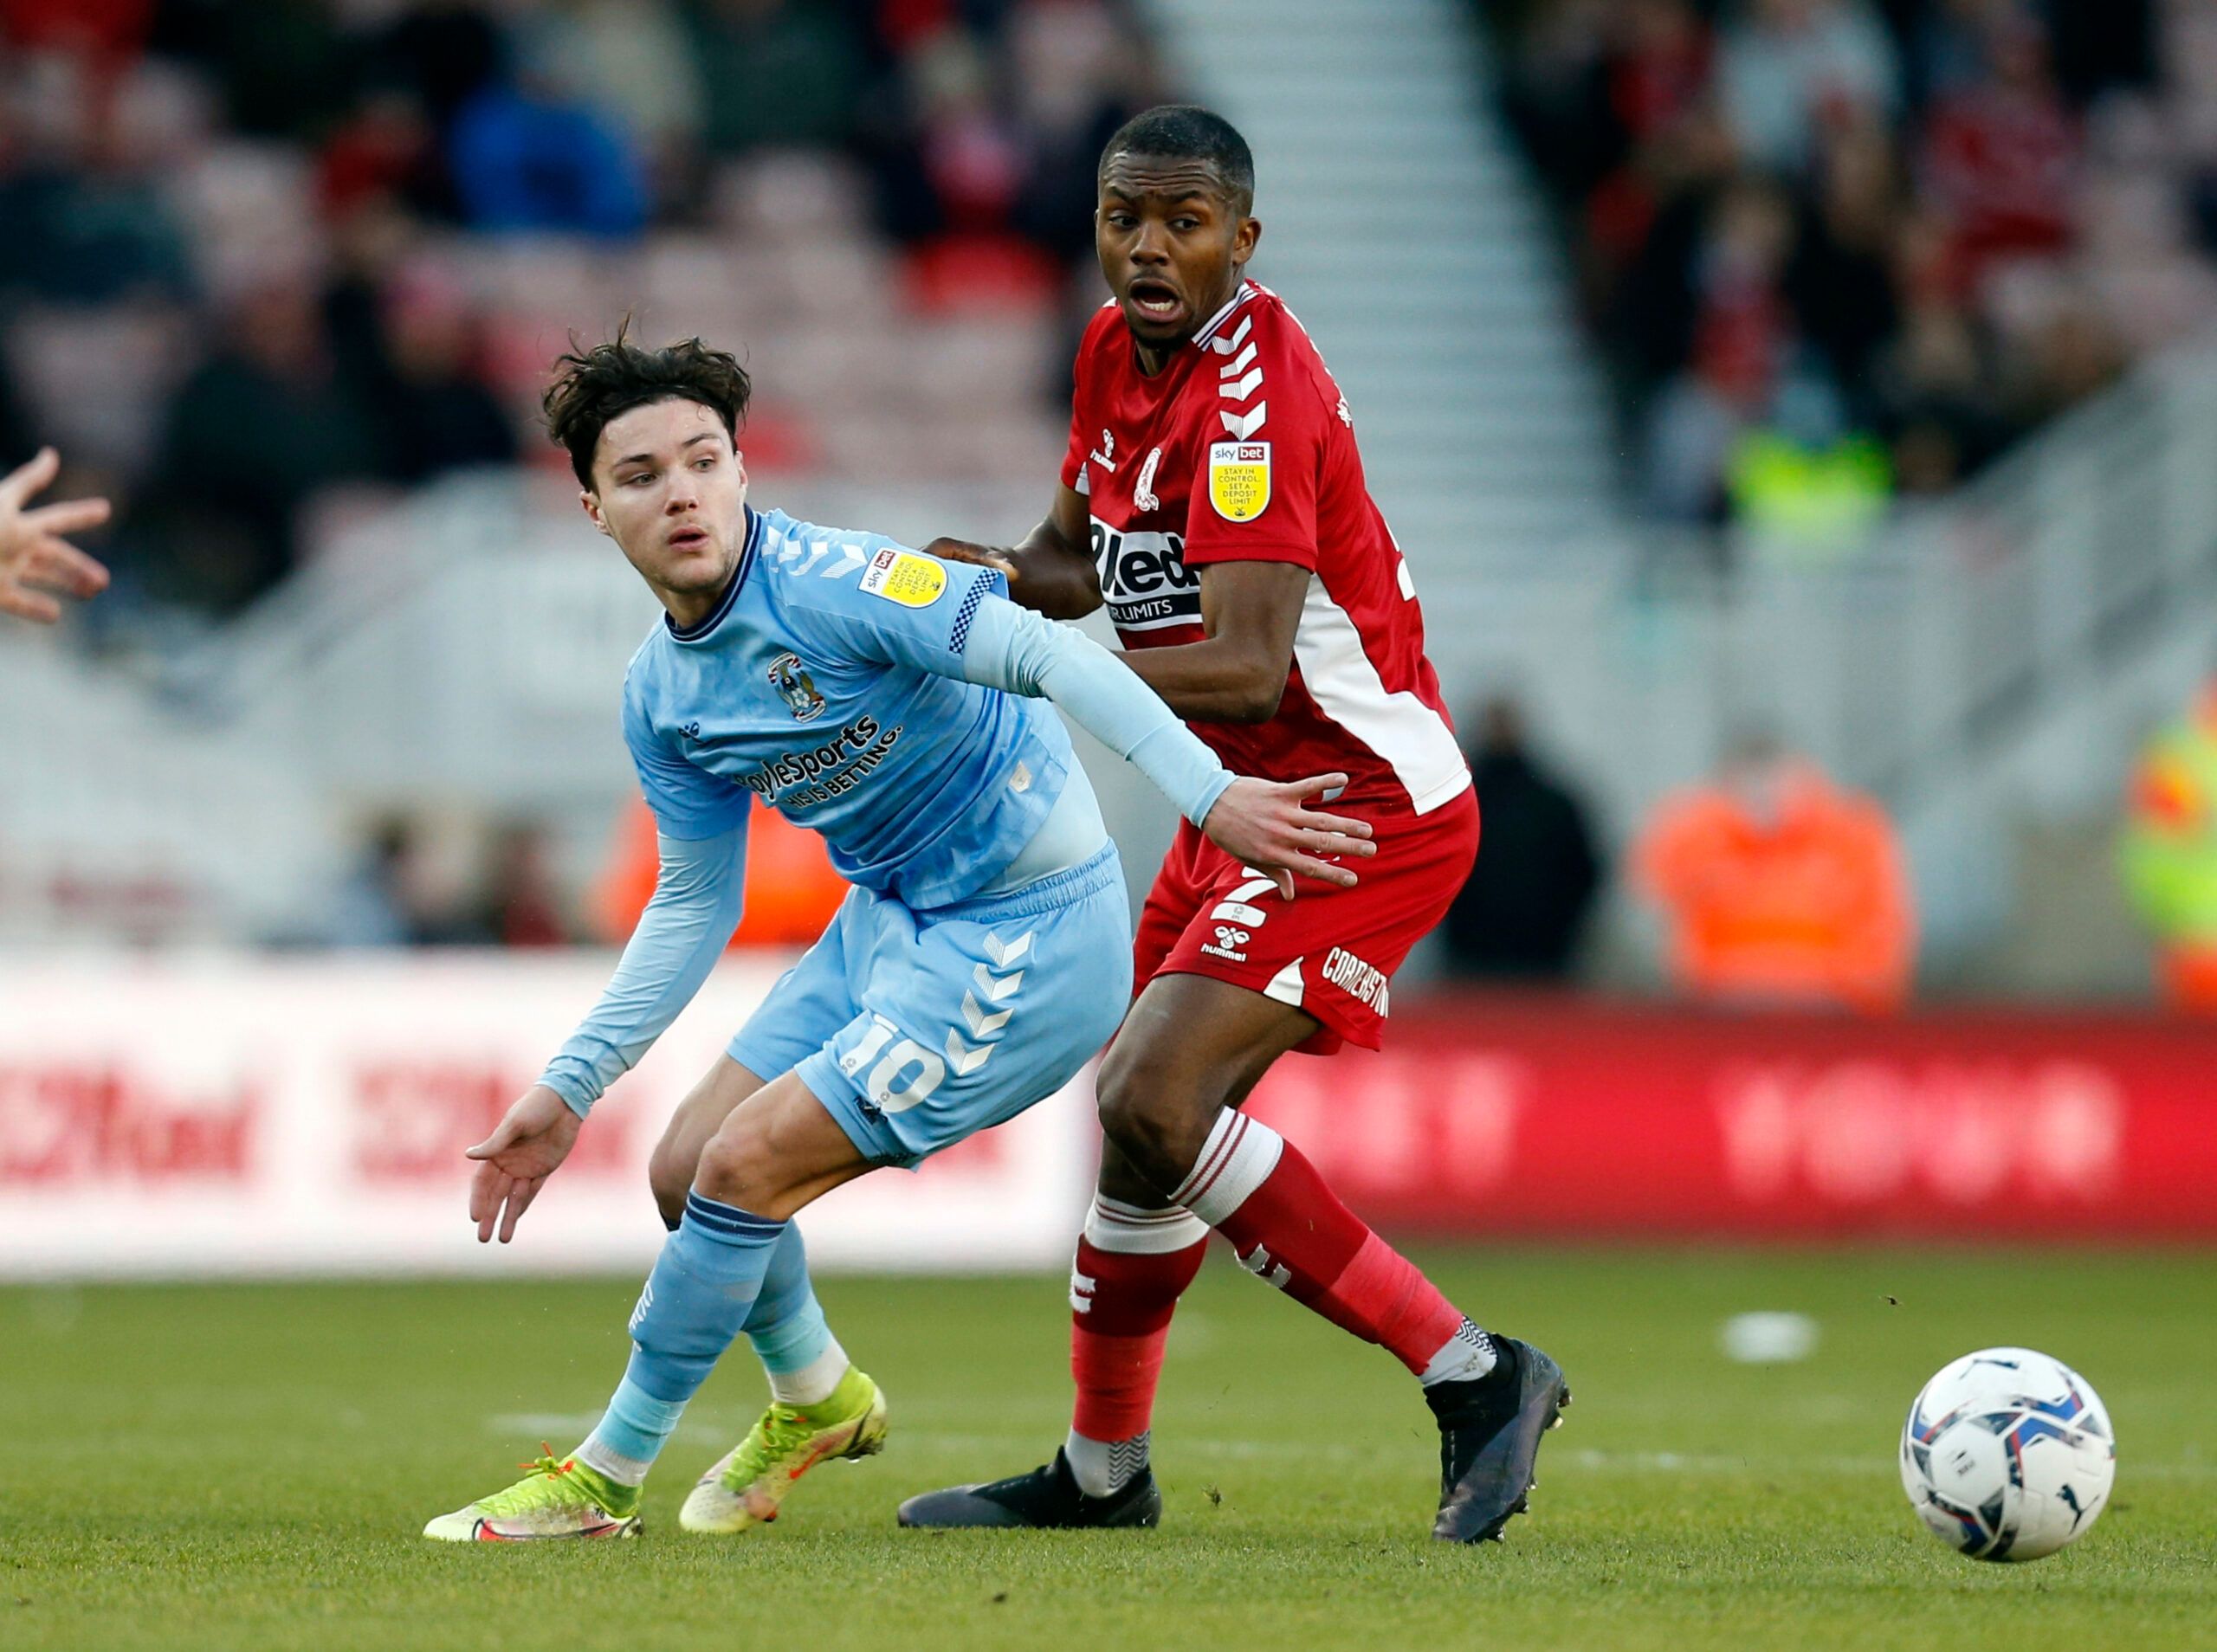 Soccer Football - Championship - Middlesbrough v Coventry City - Riverside Stadium, Middlesbrough, Britain - January 29, 2022 Middlesbrough's Anfernee Dijksteel in action with Coventry City's Callum O'Hare Action Images/Ed Sykes EDITORIAL USE ONLY. No use with unauthorized audio, video, data, fixture lists, club/league logos or 'live' services. Online in-match use limited to 75 images, no video emulation. No use in betting, games or single club /league/player publications.  Please contact your a